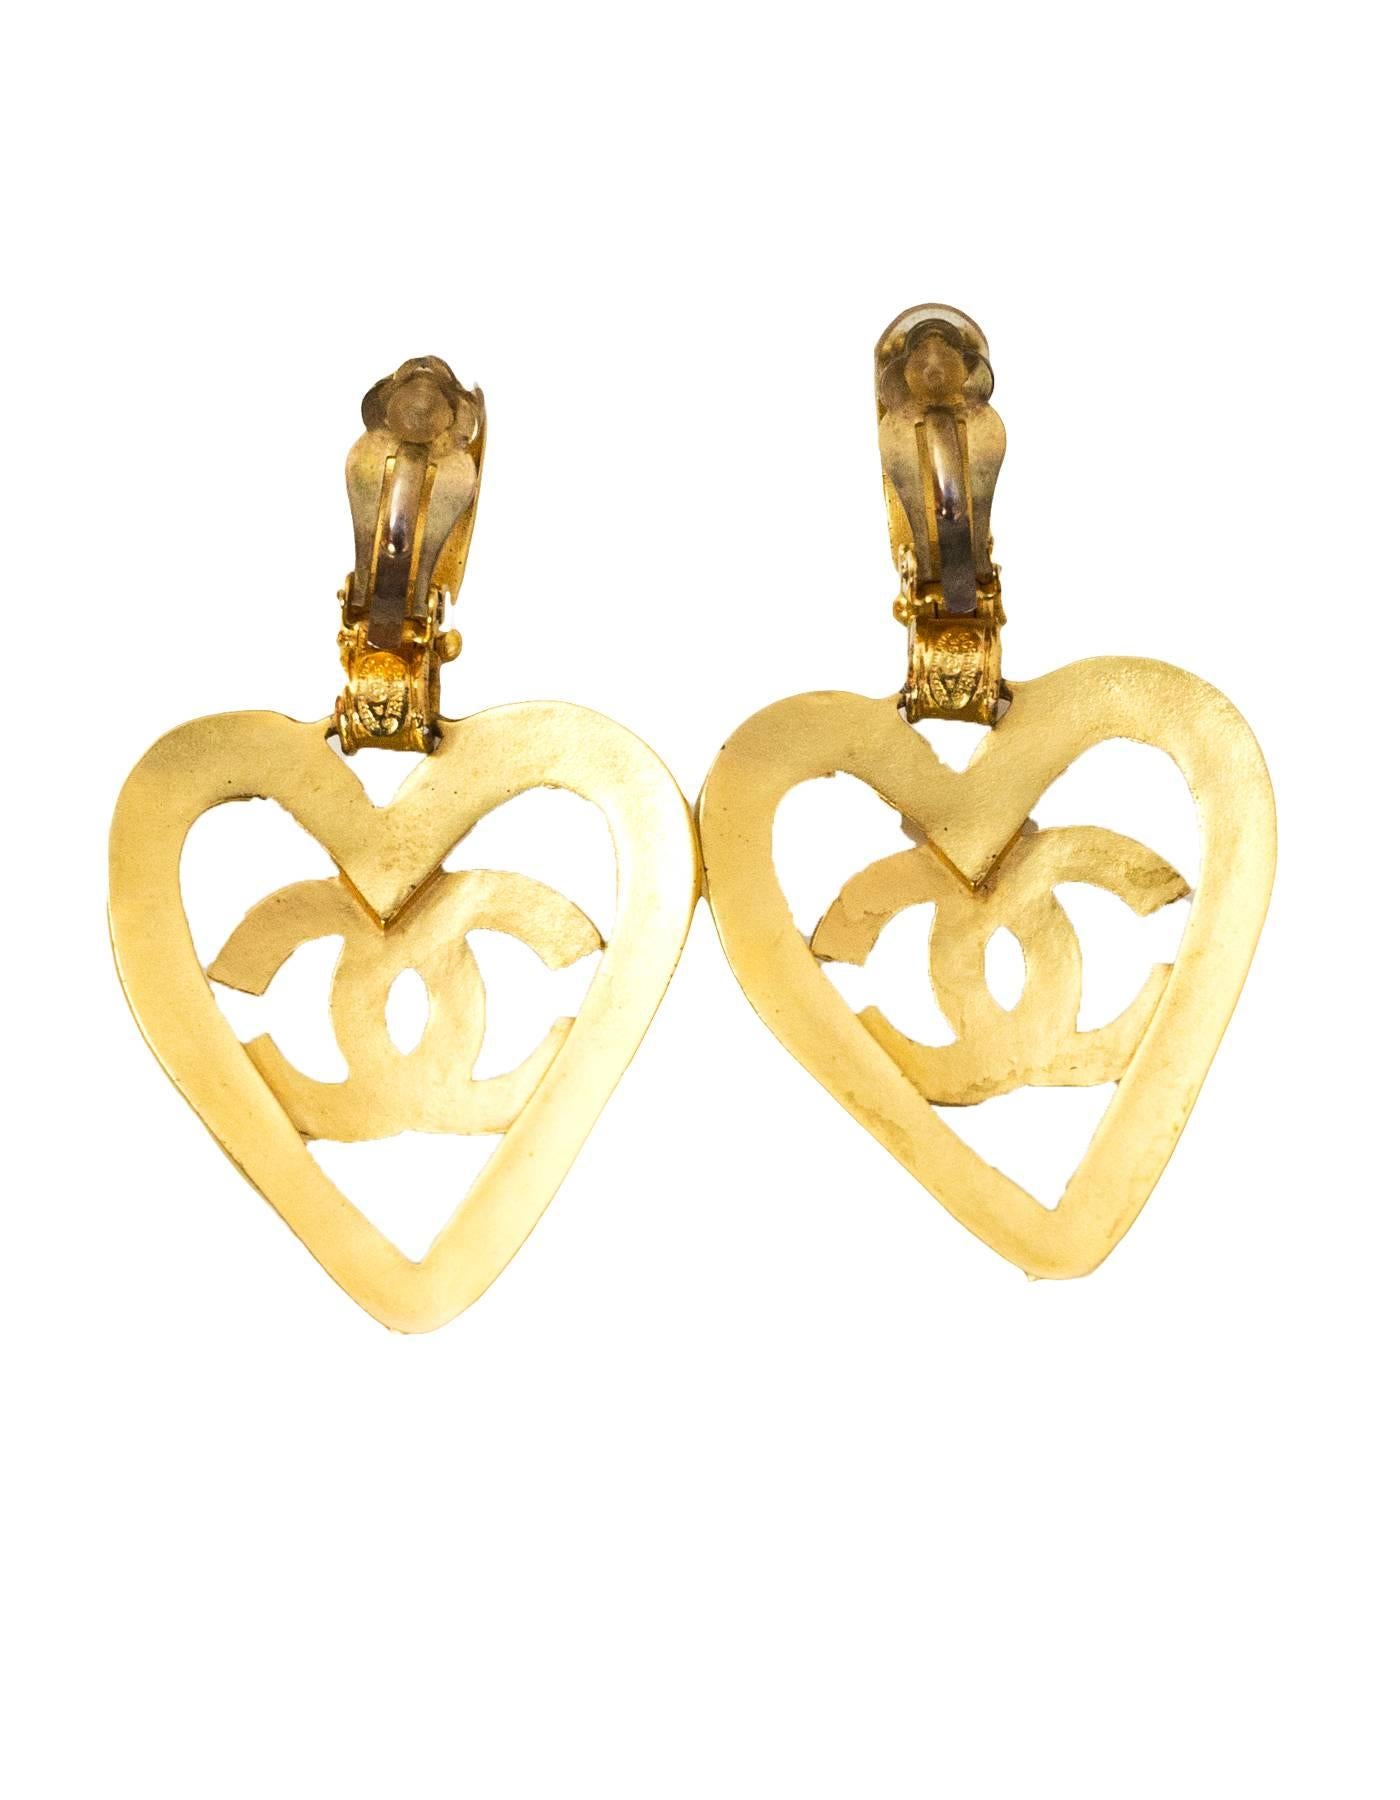 Chanel Large CC Heart Clip-On Earrings

Made In: France
Year of Production: 1995
Color: Gold
Materials: Metal
Closure: Clip on
Stamp: Chanel 95 CC Made In France
Overall Condition: Excellent pre-owned condition
Included: Chanel box

Measurements: